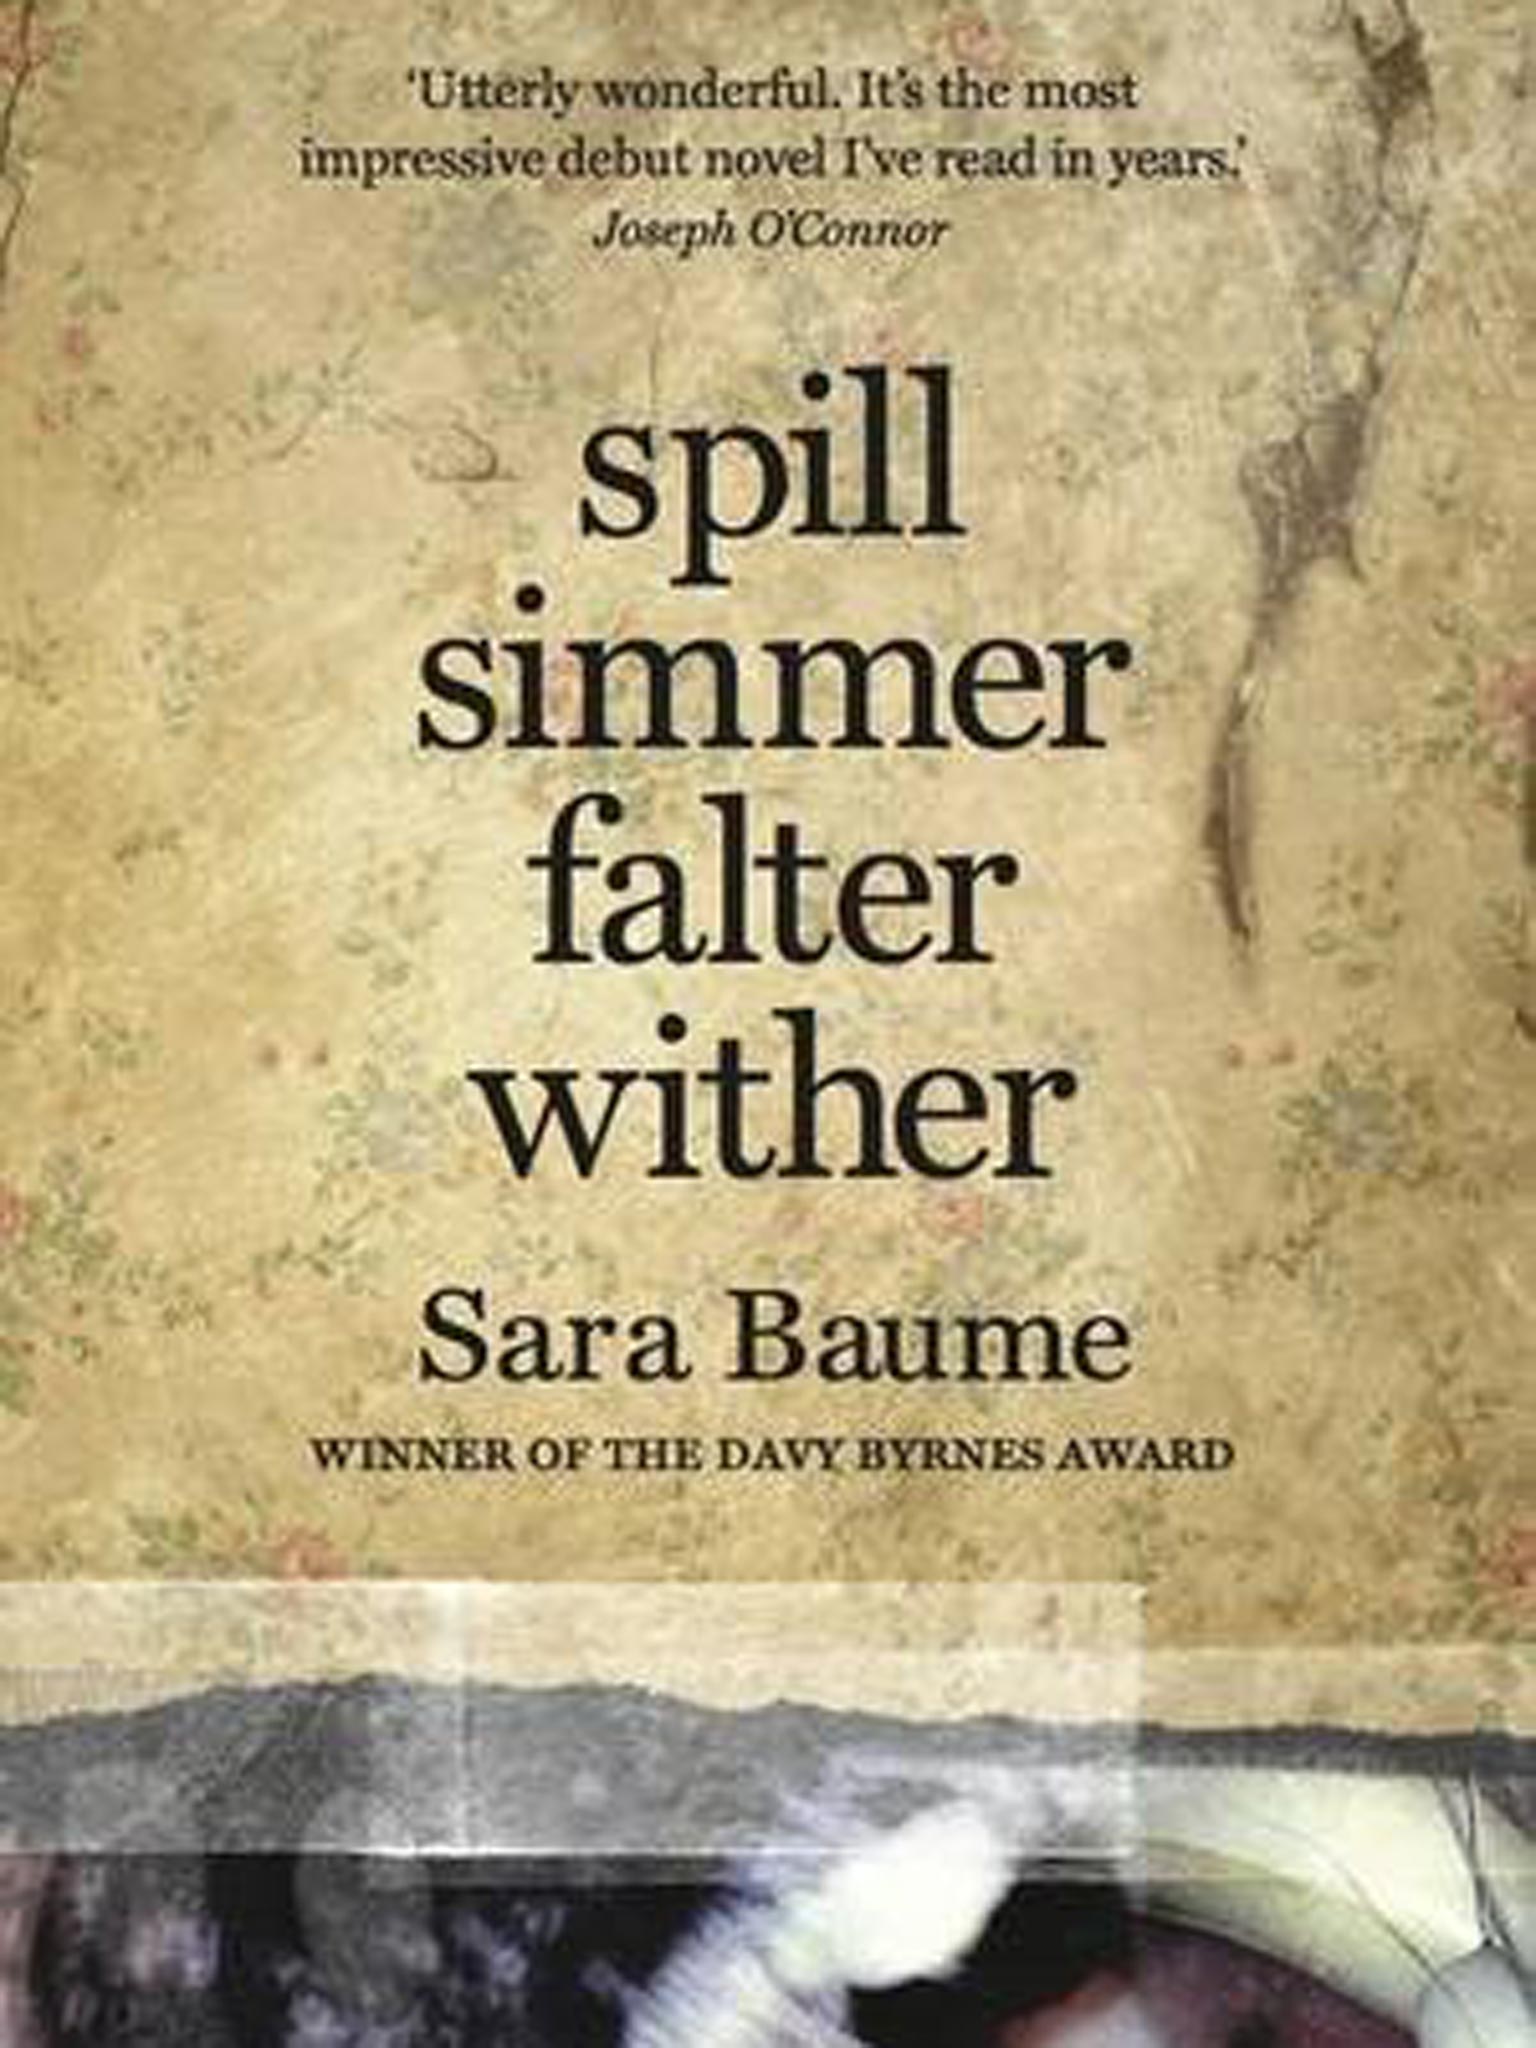 spill simmer falter wither review